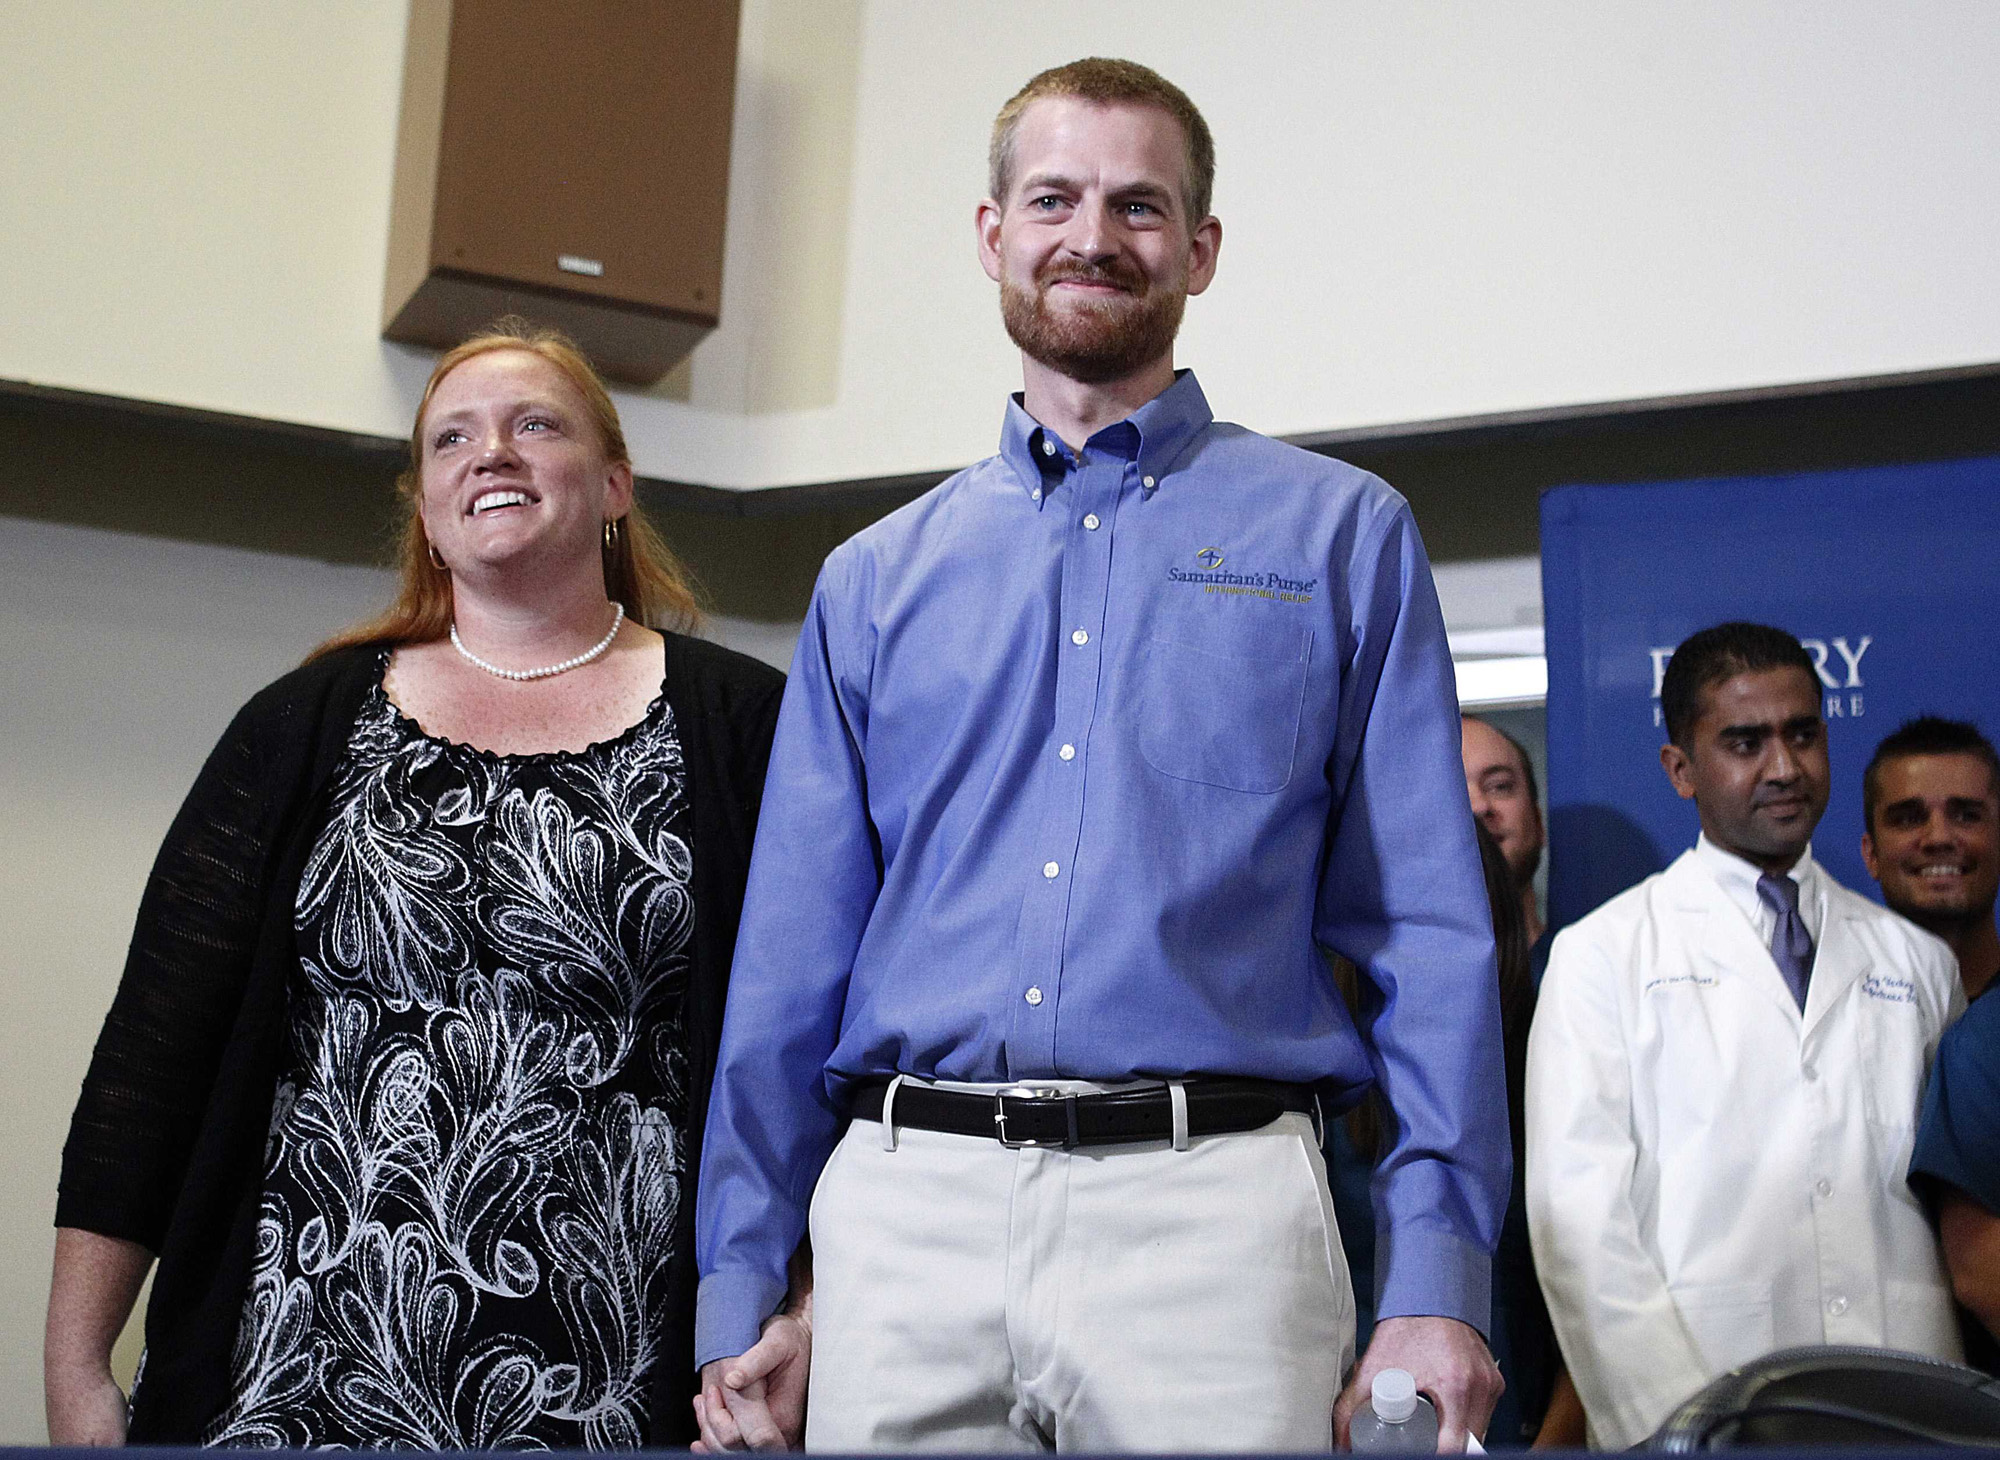 Brantly who contracted the deadly virus Ebola, and wife Amber during a press conference at Emory University Hospital in Atlanta